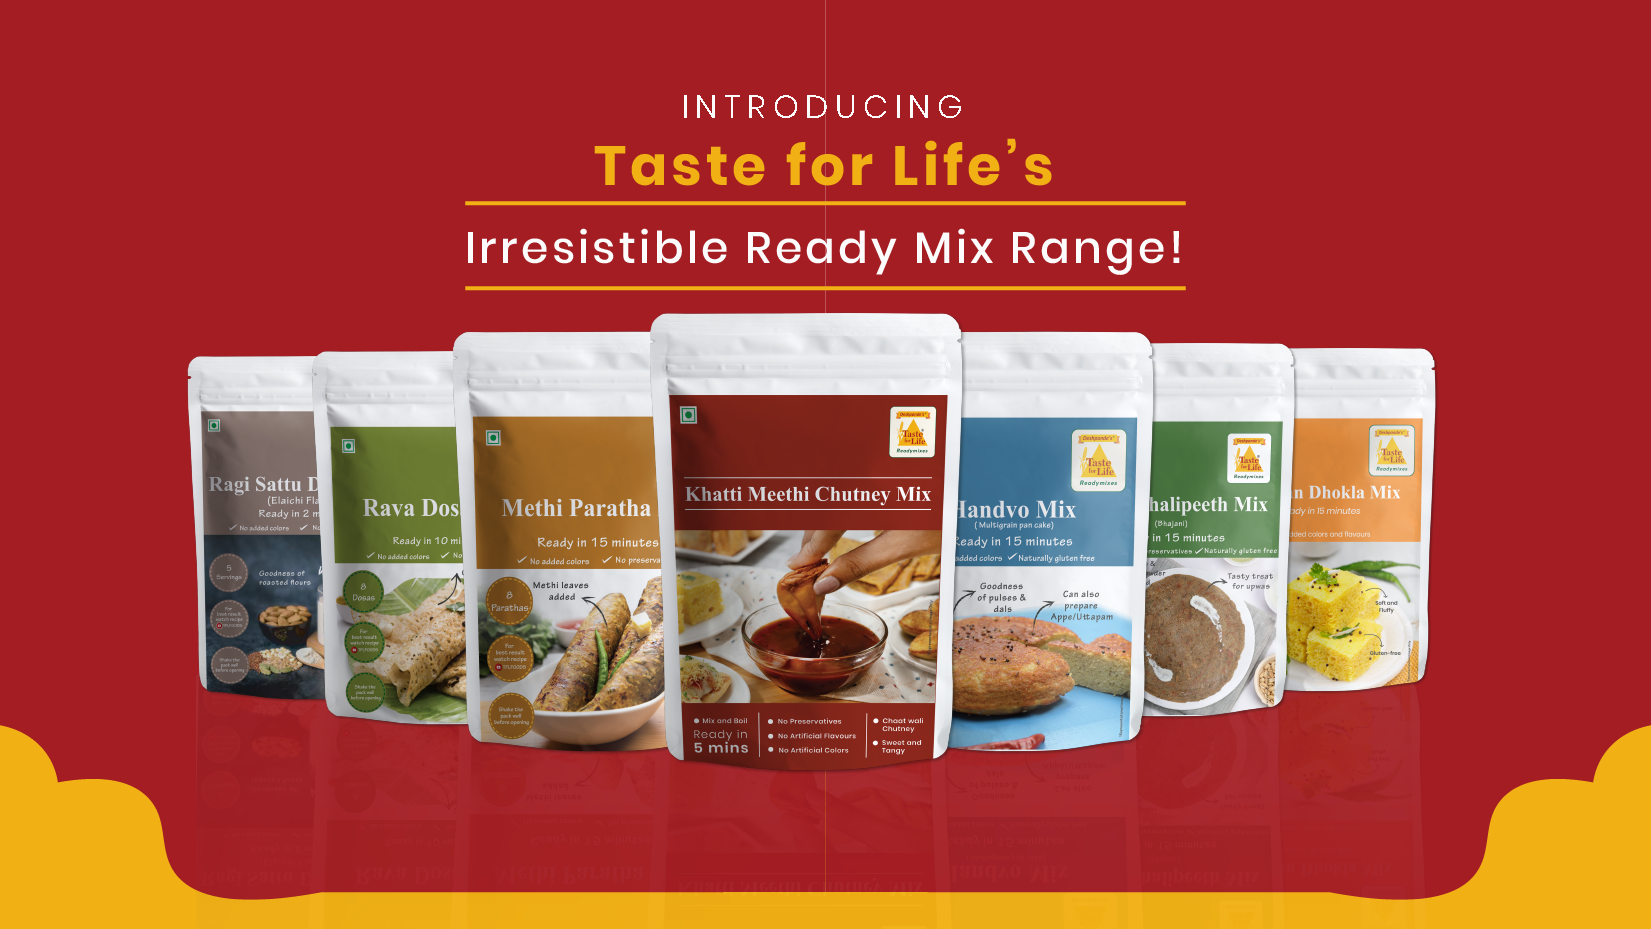 Introducing Taste for Life’s Irresistible Readymix Range!